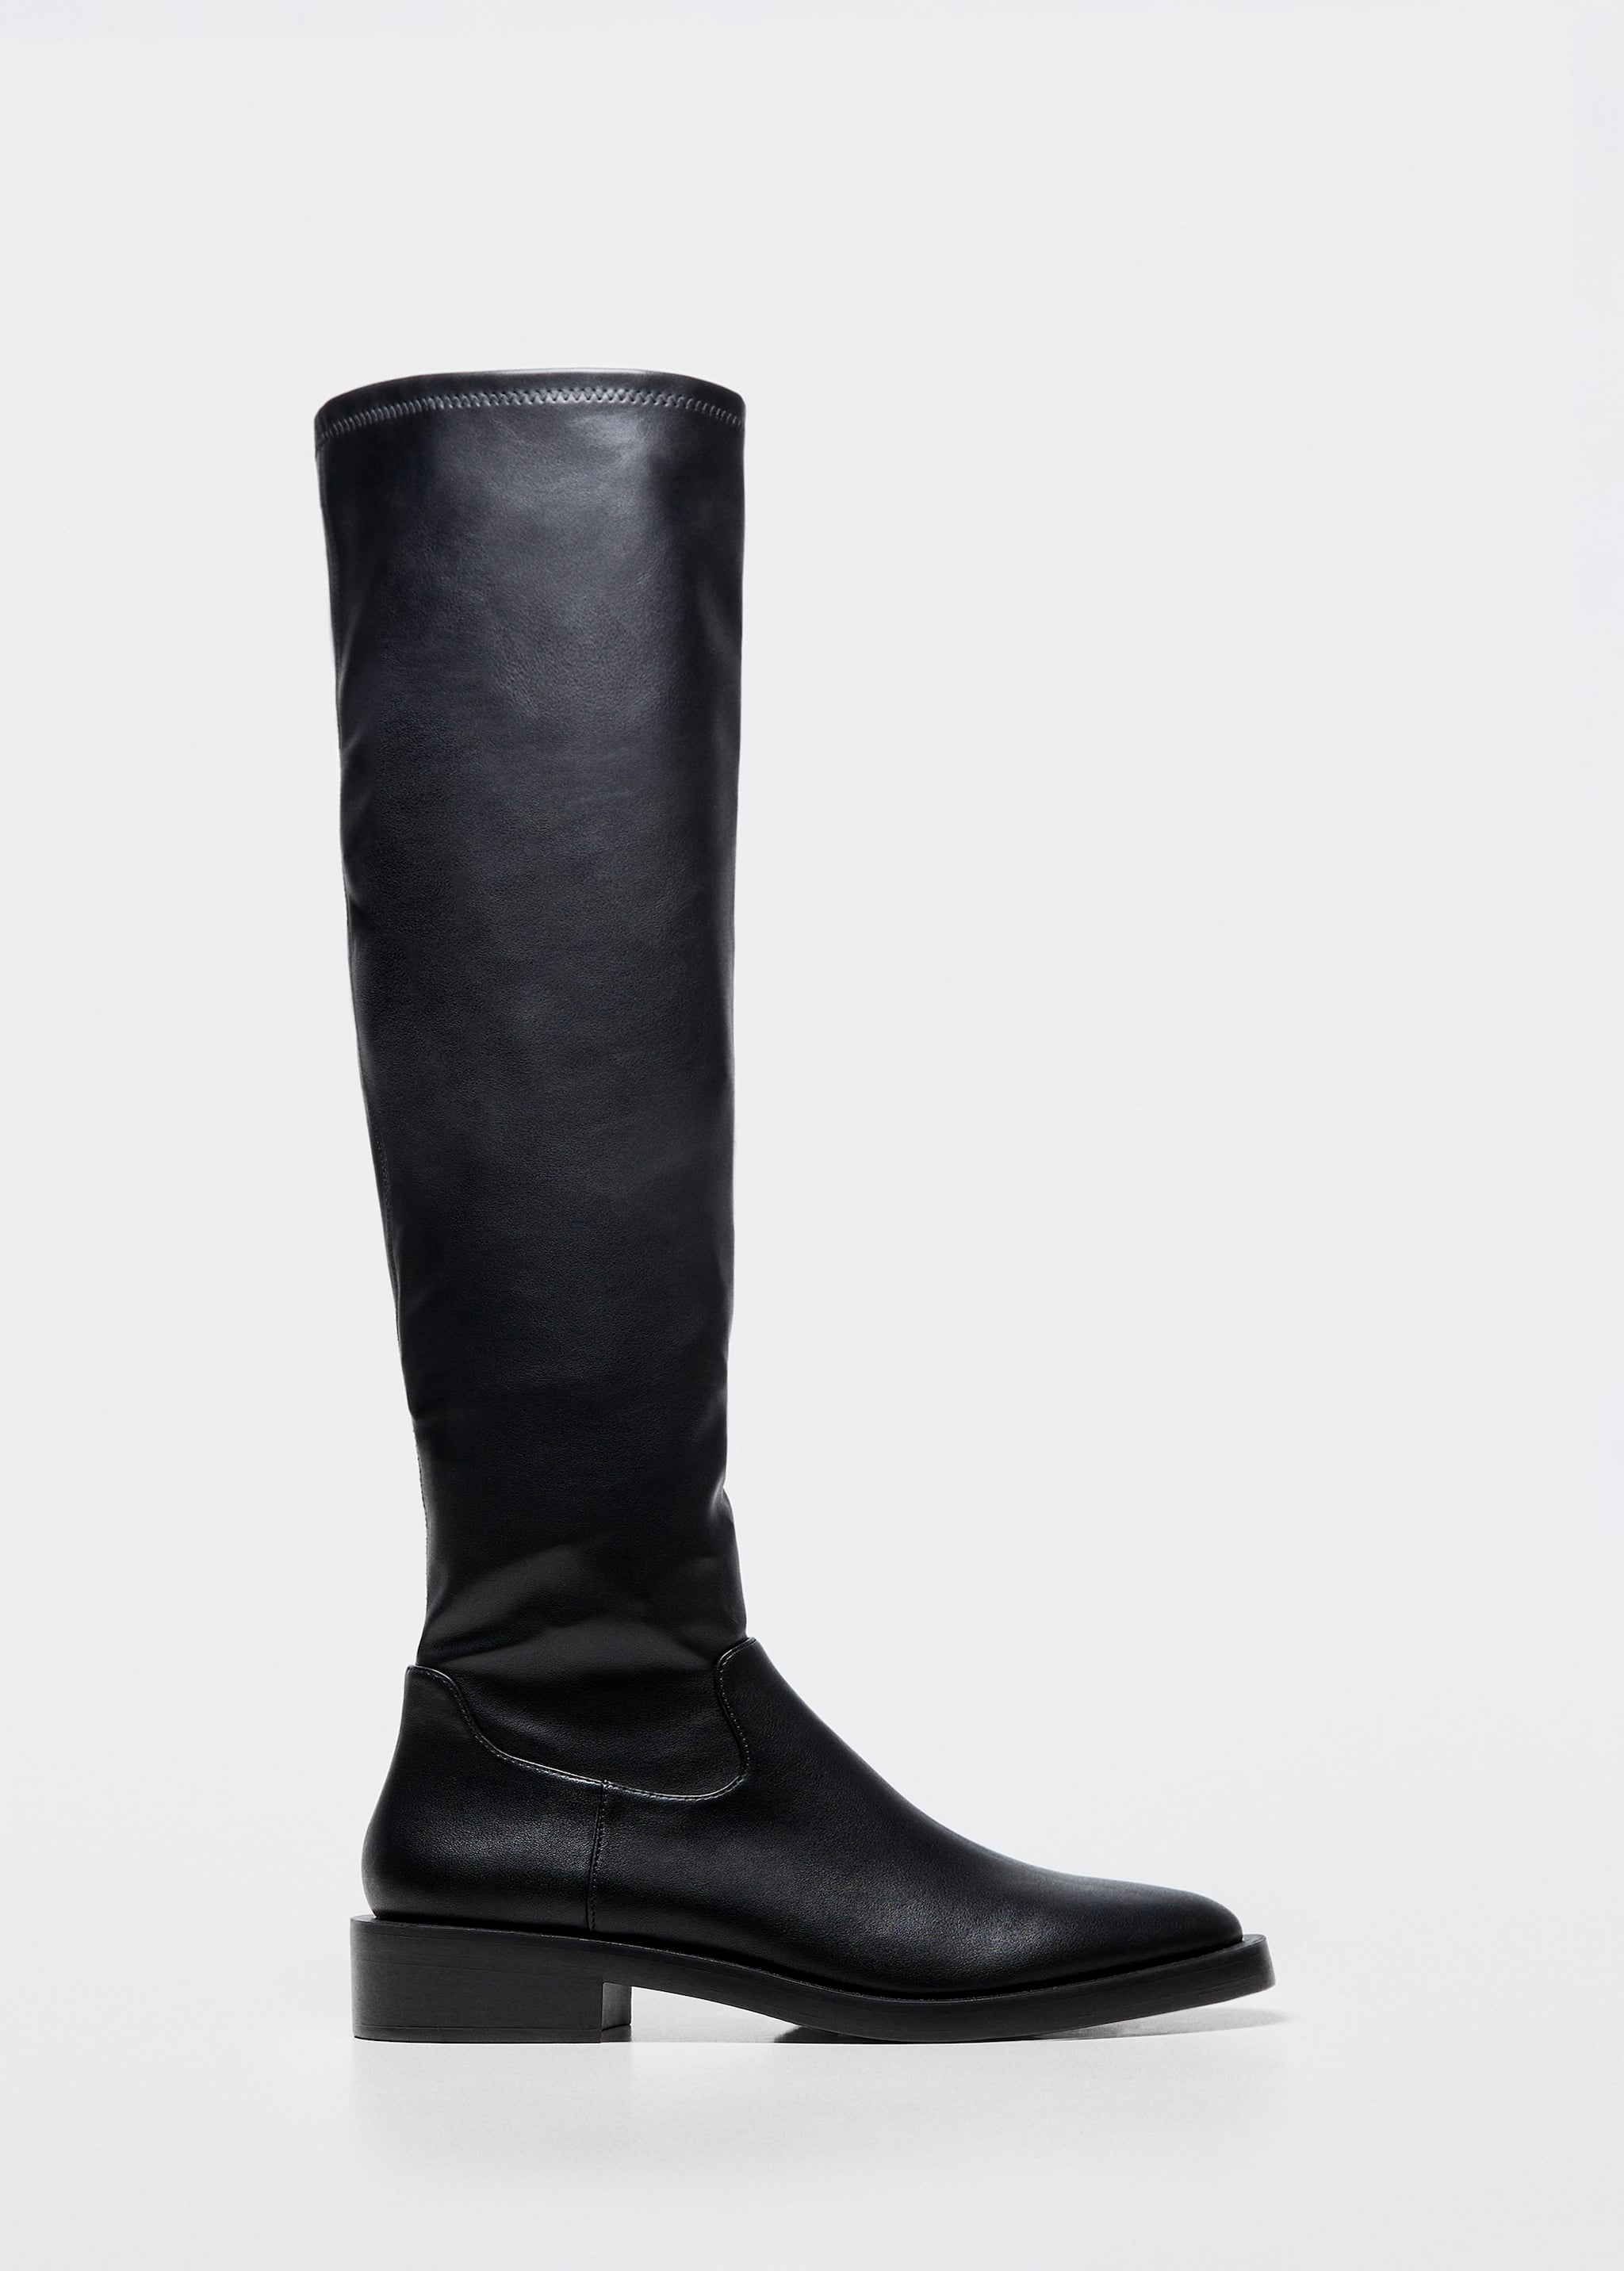 Knee-length boots - Article without model